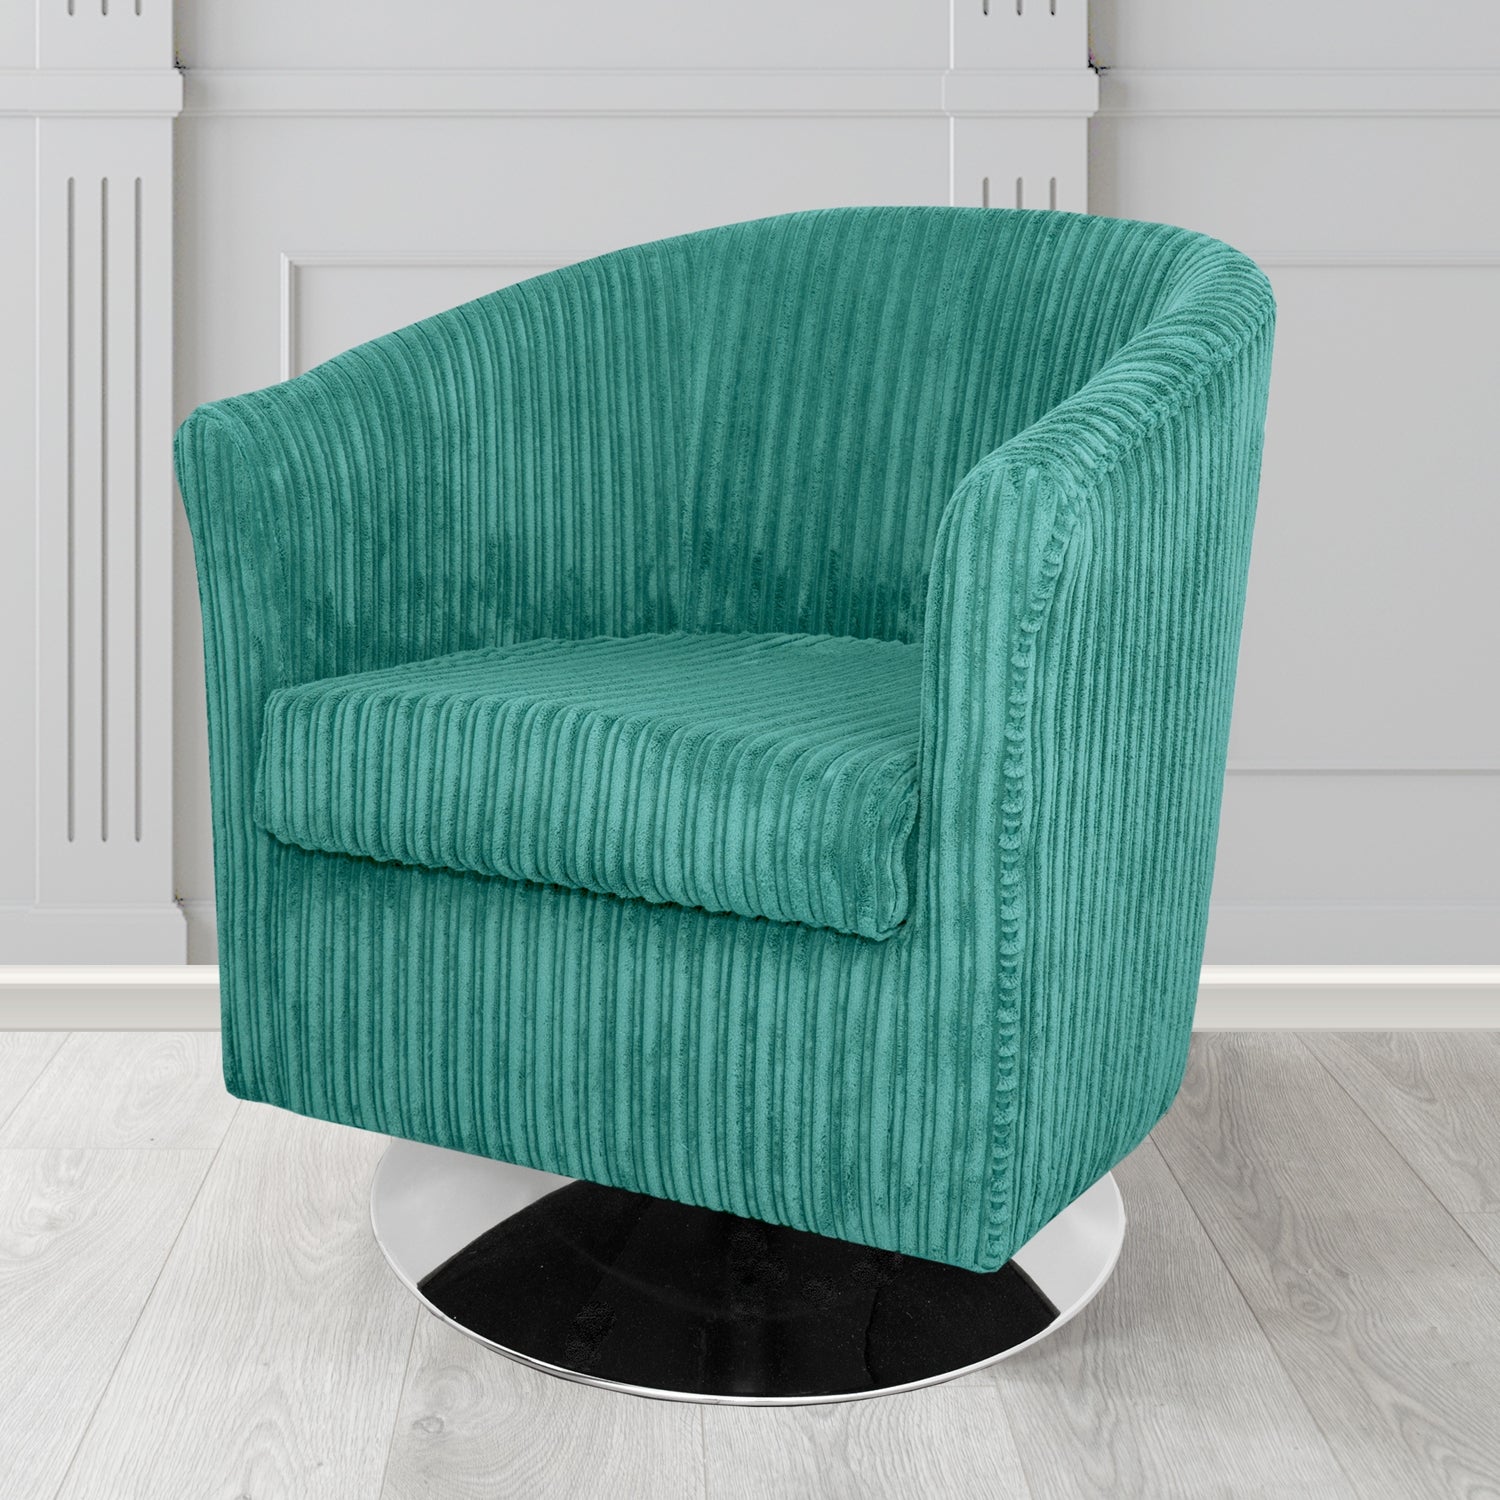 Tuscany Conway Teal Plain Texture Fabric Swivel Tub Chair (6581748400170)